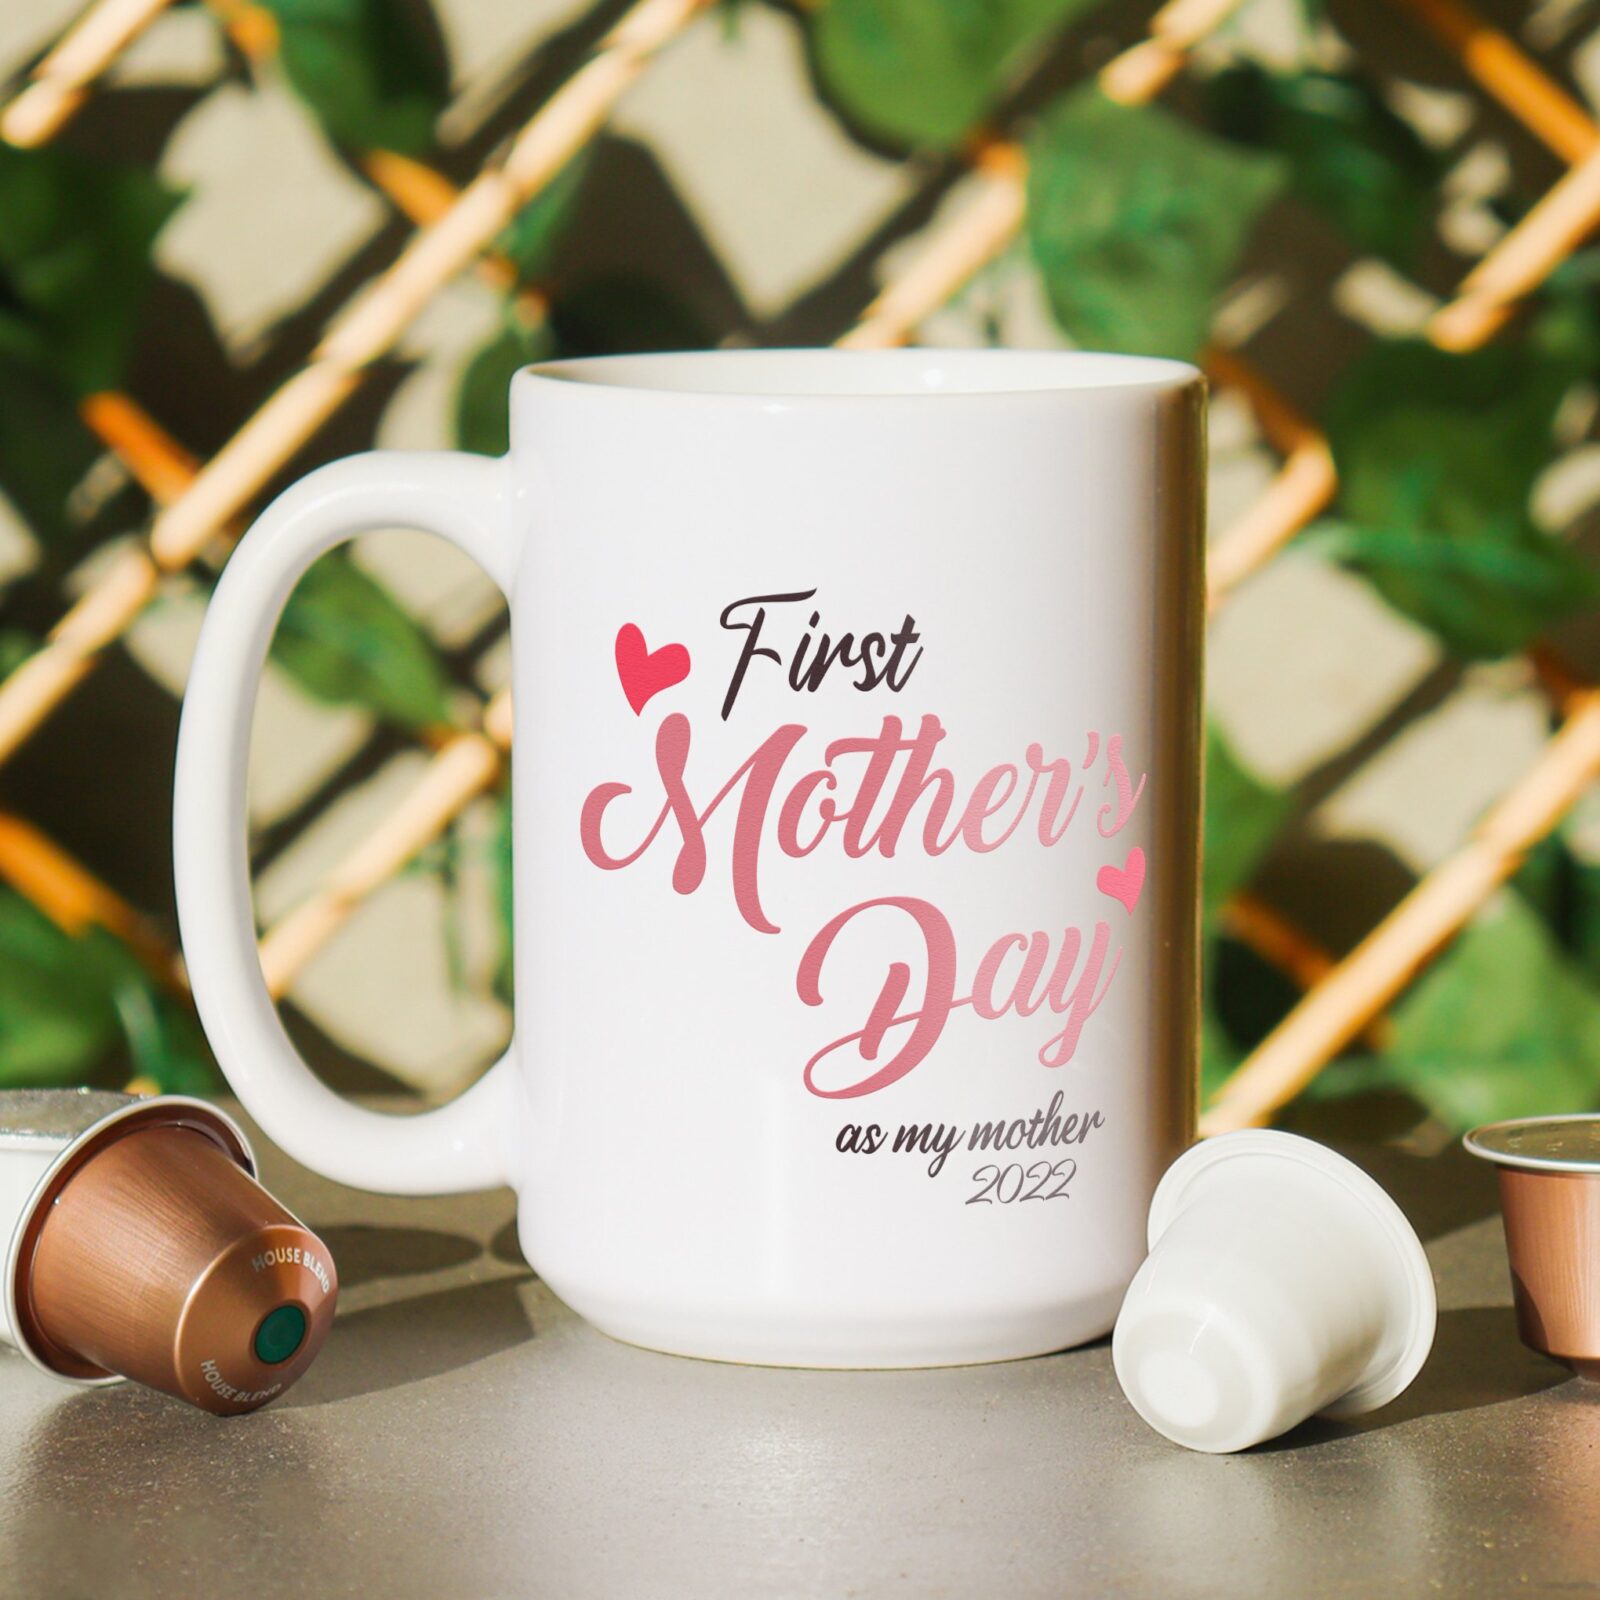 First mother's day coffee mug